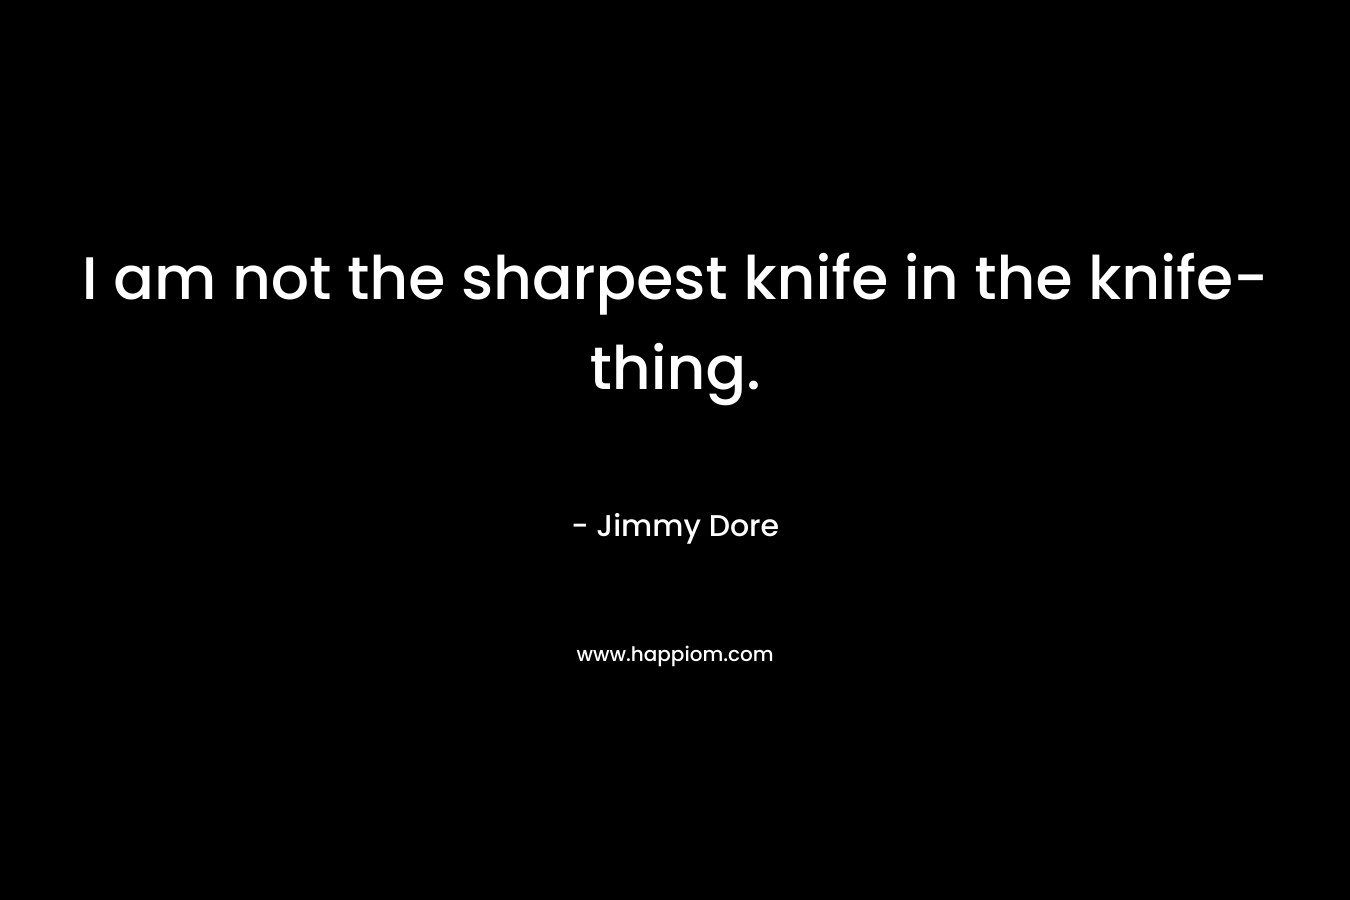 I am not the sharpest knife in the knife-thing.